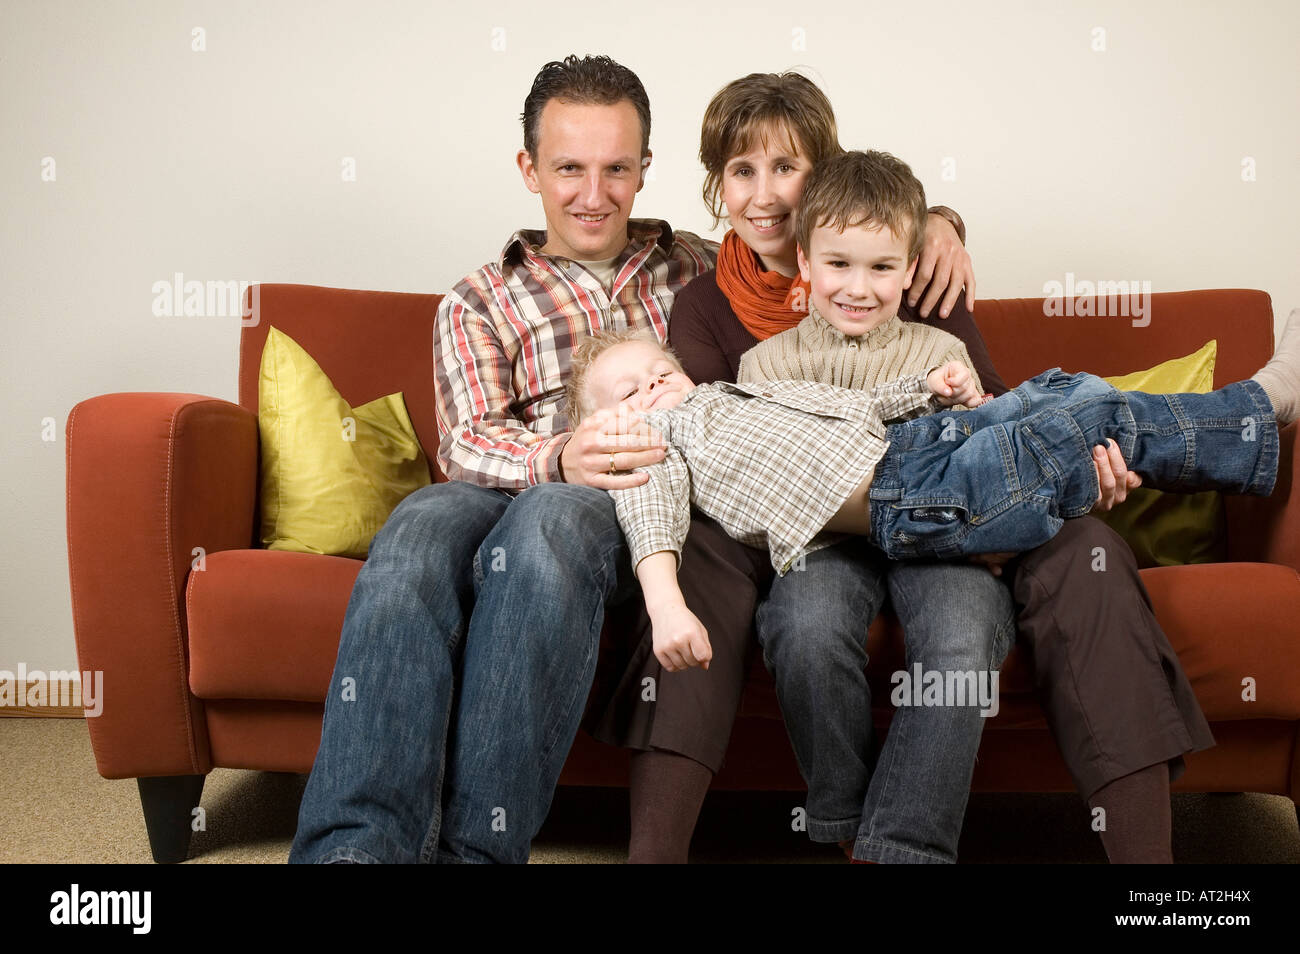 Nice family picture sitting together on a couch Stock Photo